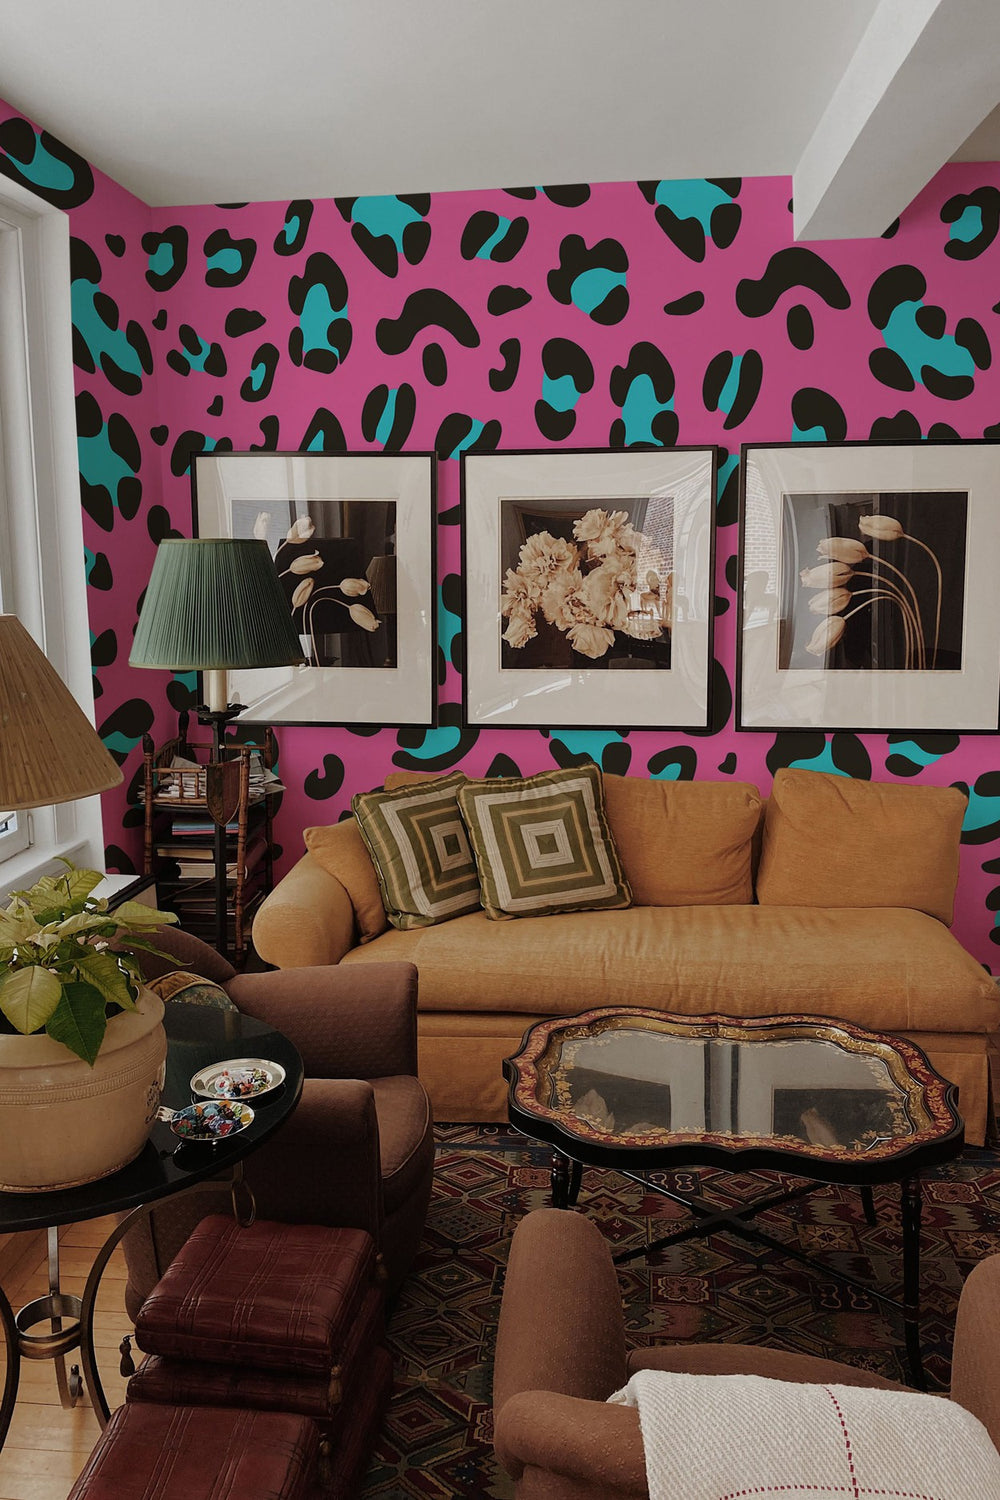 A cozy living room interior featuring a bold pink wall with black leopard print mural, adorned with framed art, and furnished with a warm-toned couch and comfortable chairs